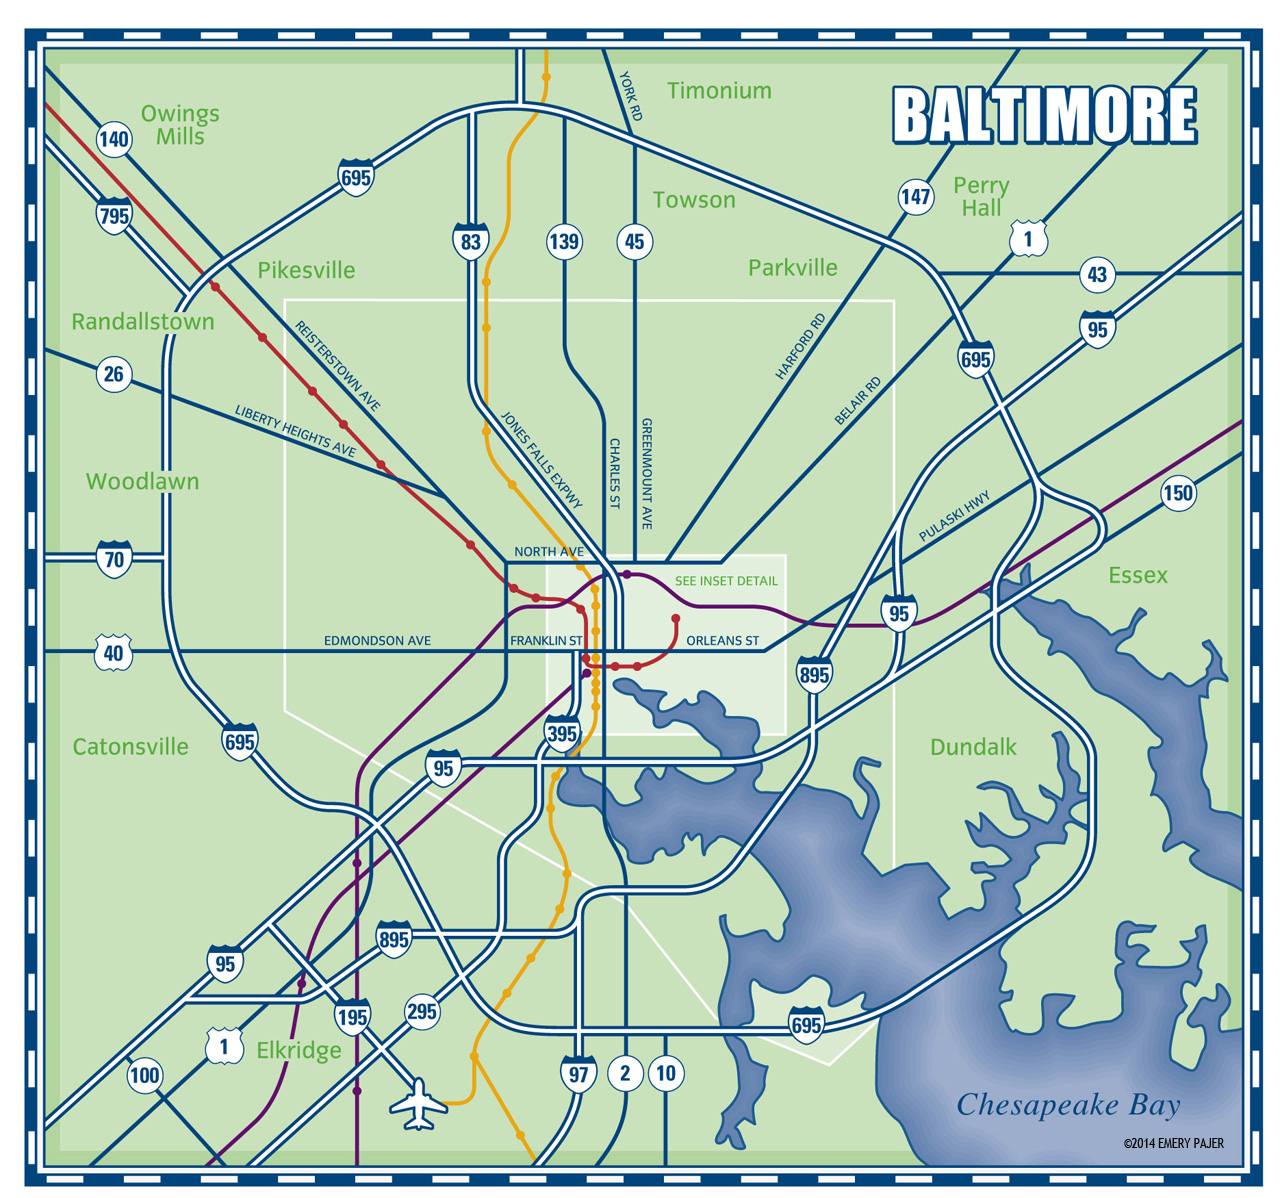 county map illustration of Baltimore, Maryland